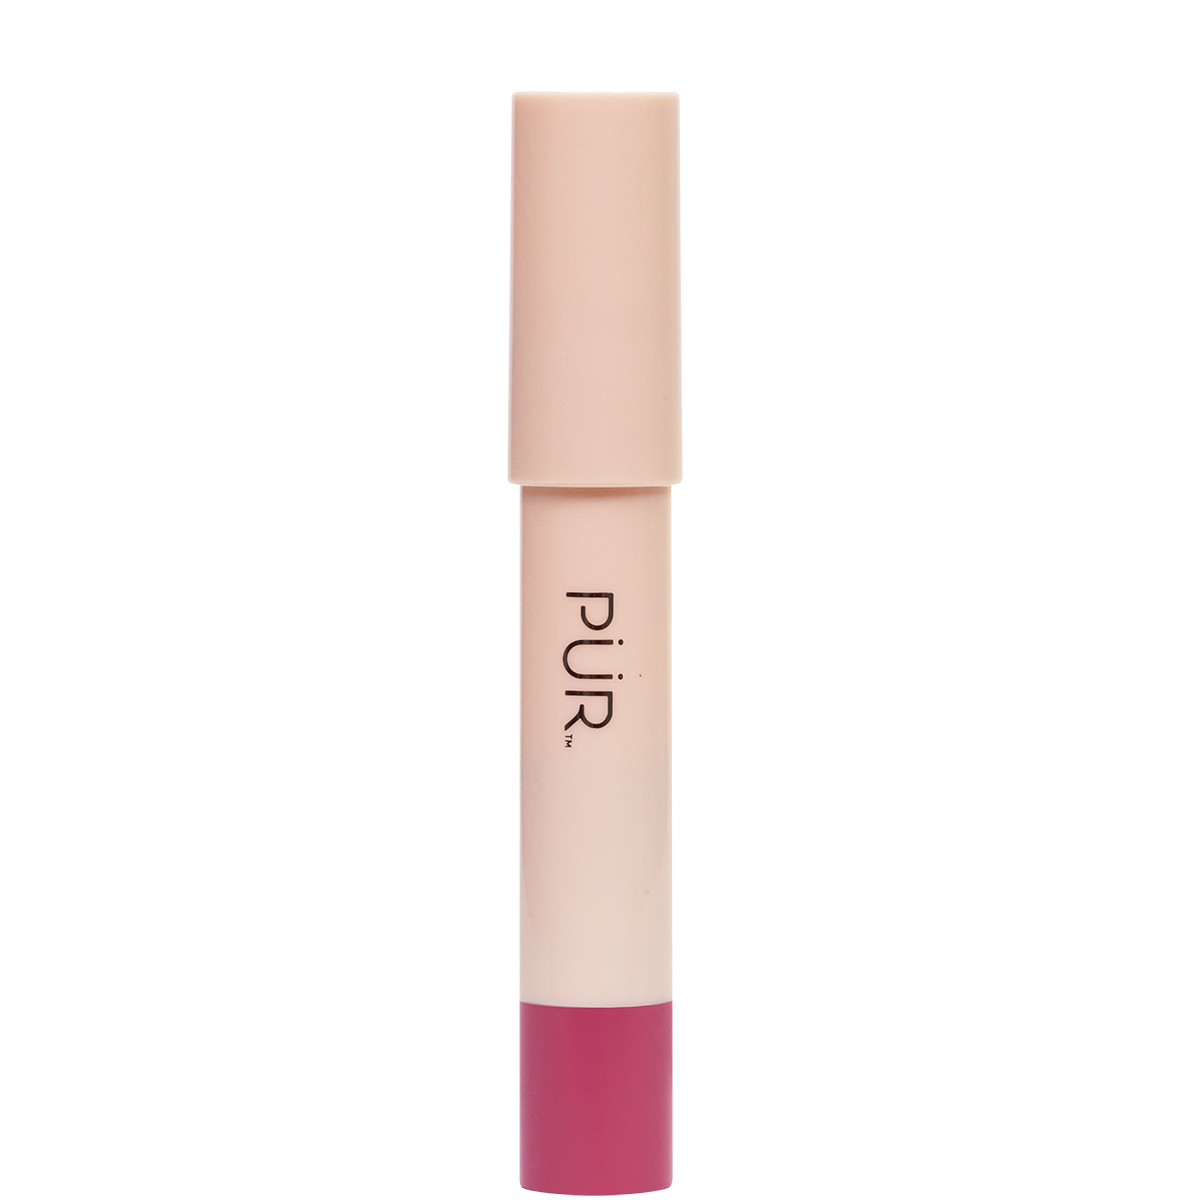 Pur Silky Pout Creamy Lip Chubby